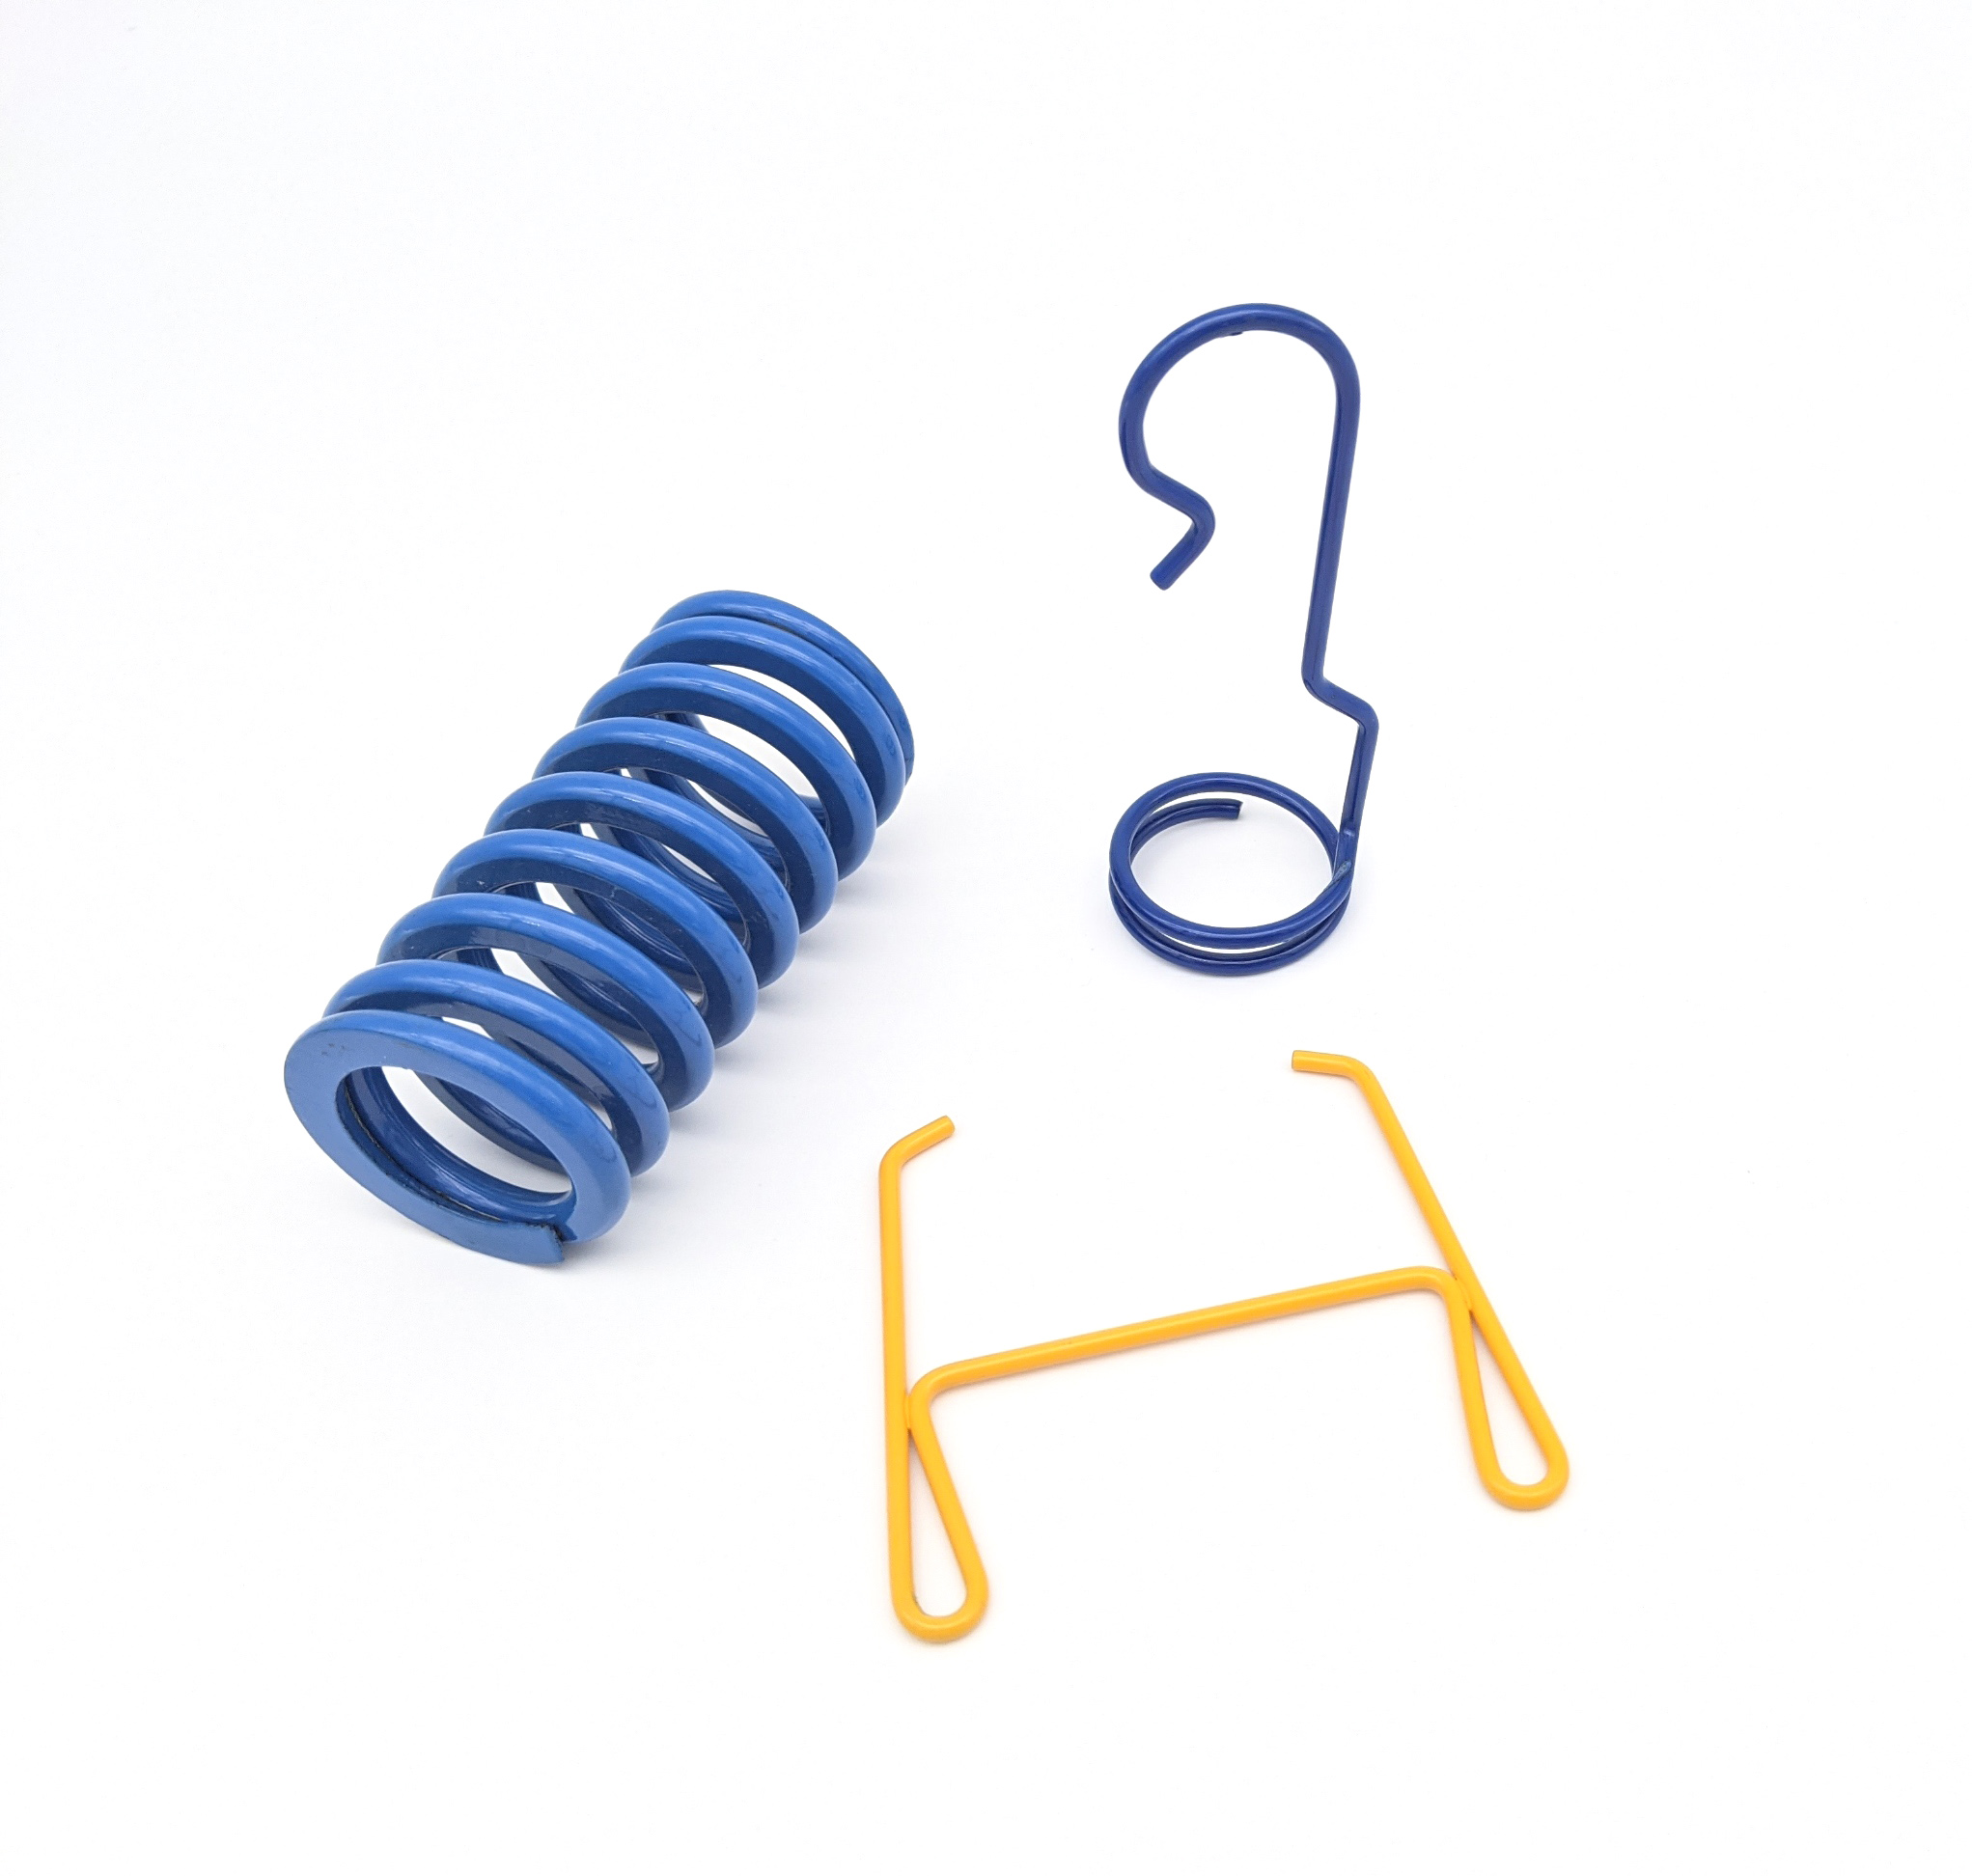 Coil springs and wire forms with powder coat finishing